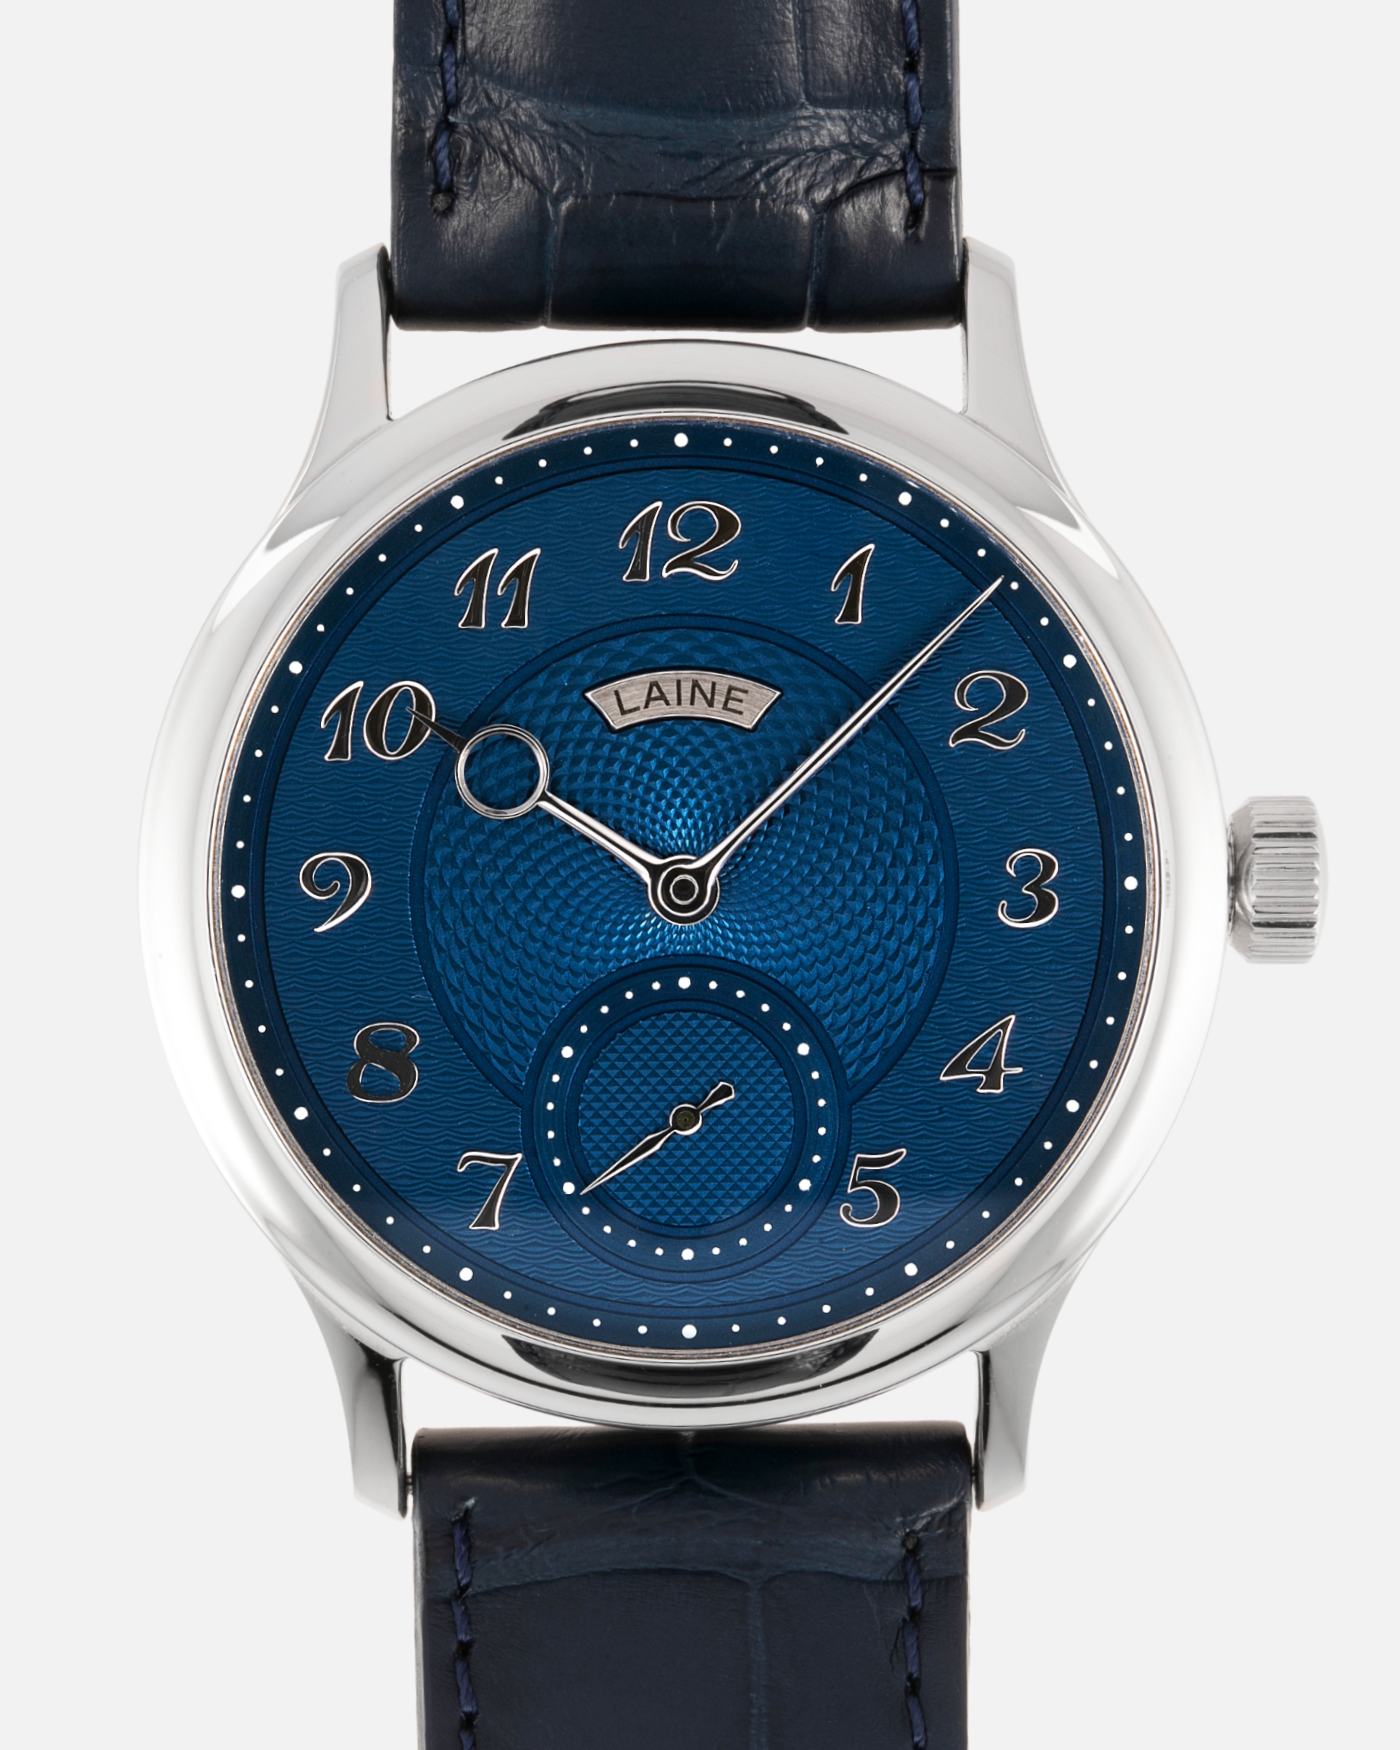 Brand: Laine Year: 2021 Model: V38 Material: Stainless Steel Movement: Vaucher VMF 5401  Case Diameter: 38mm Strap: Dark Blue Laine Alligator Strap and Signed Stainless Steel Tang Buckle